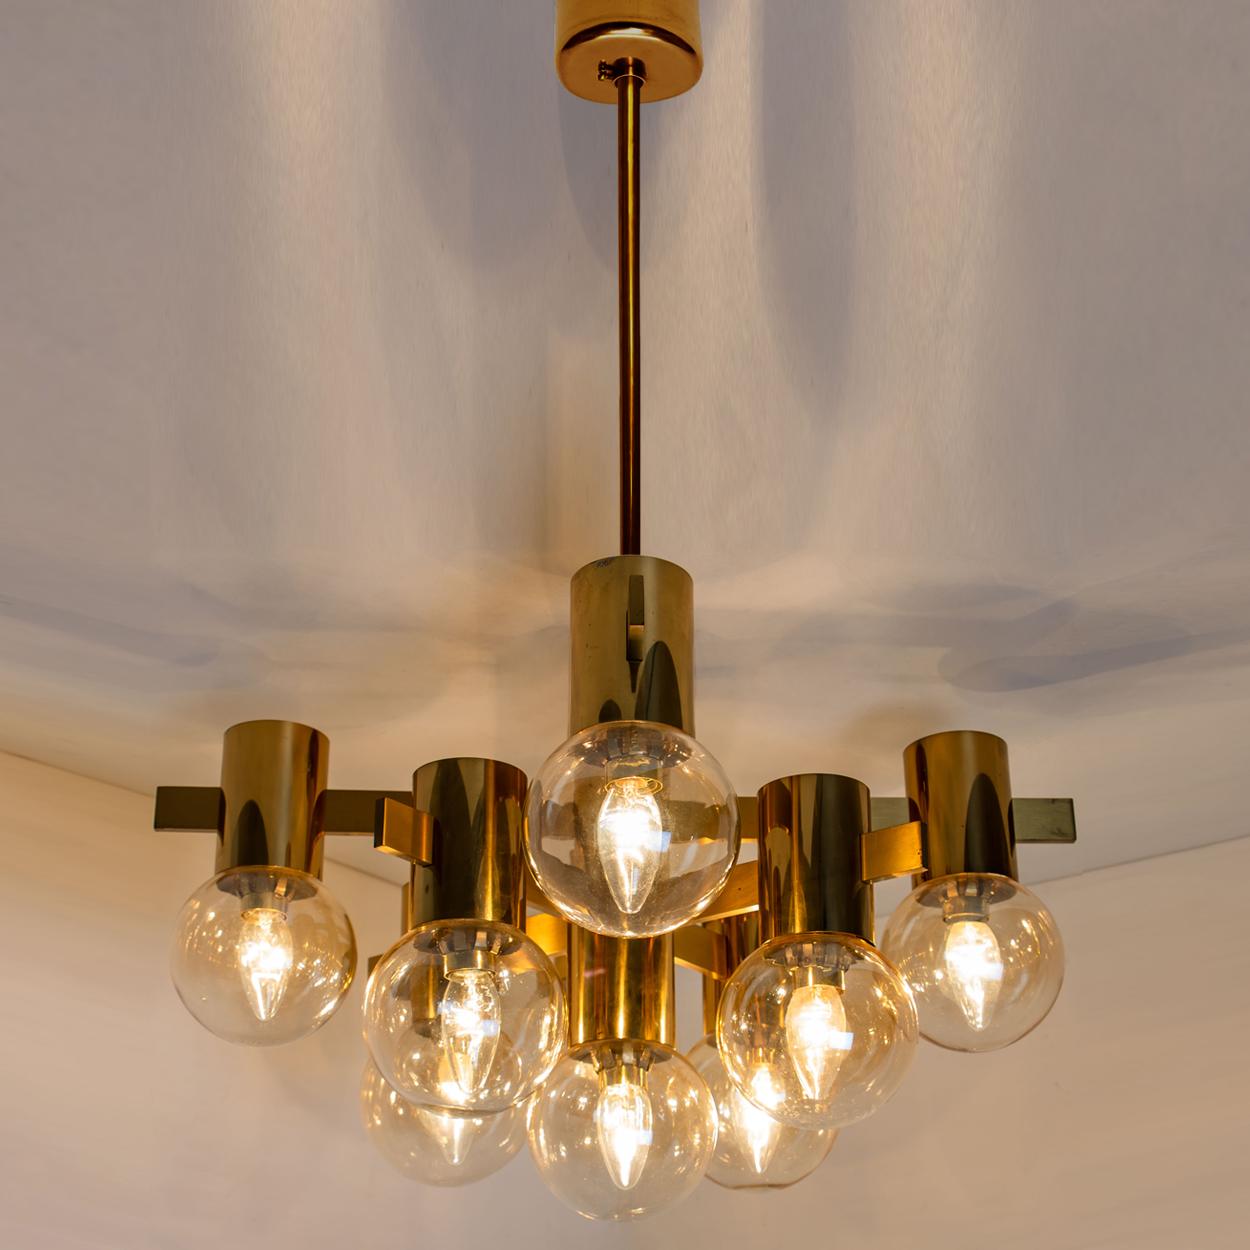 This stunning large brass light fixture with smoked glass bowls and gold-plated fittings was produced in the 1970s in the style of Hans-Agne Jacobsson. Illuminates beautifully.

Size of the chandelier:
D 23.6 in. (60 cm) x H 13.8 in. (35 cm).